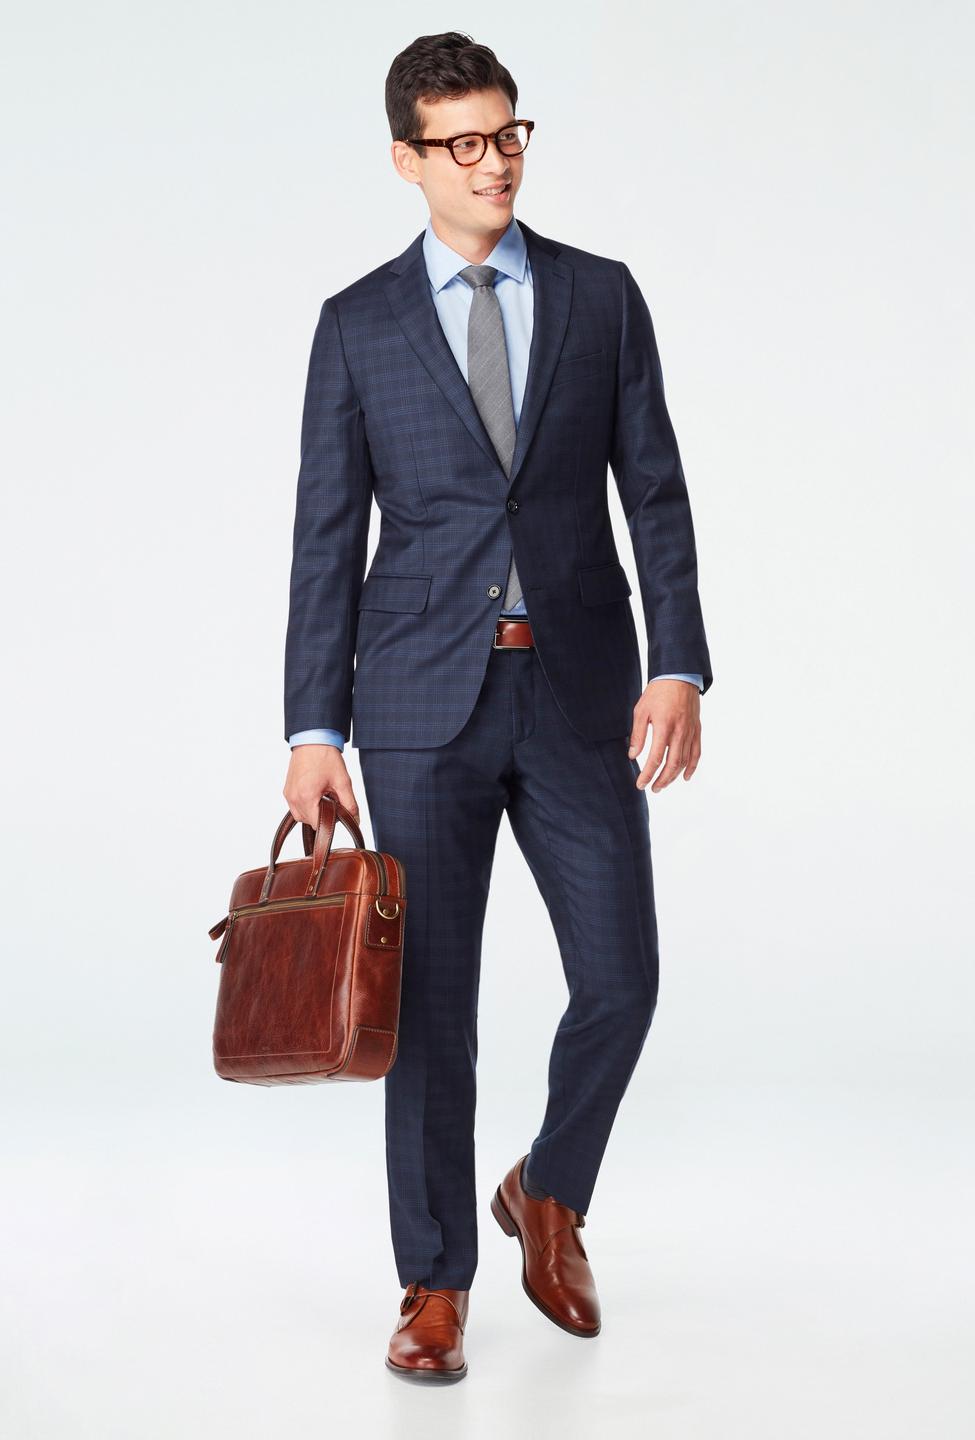 Blue suit - Doncaster Checked Design from Seasonal Indochino Collection